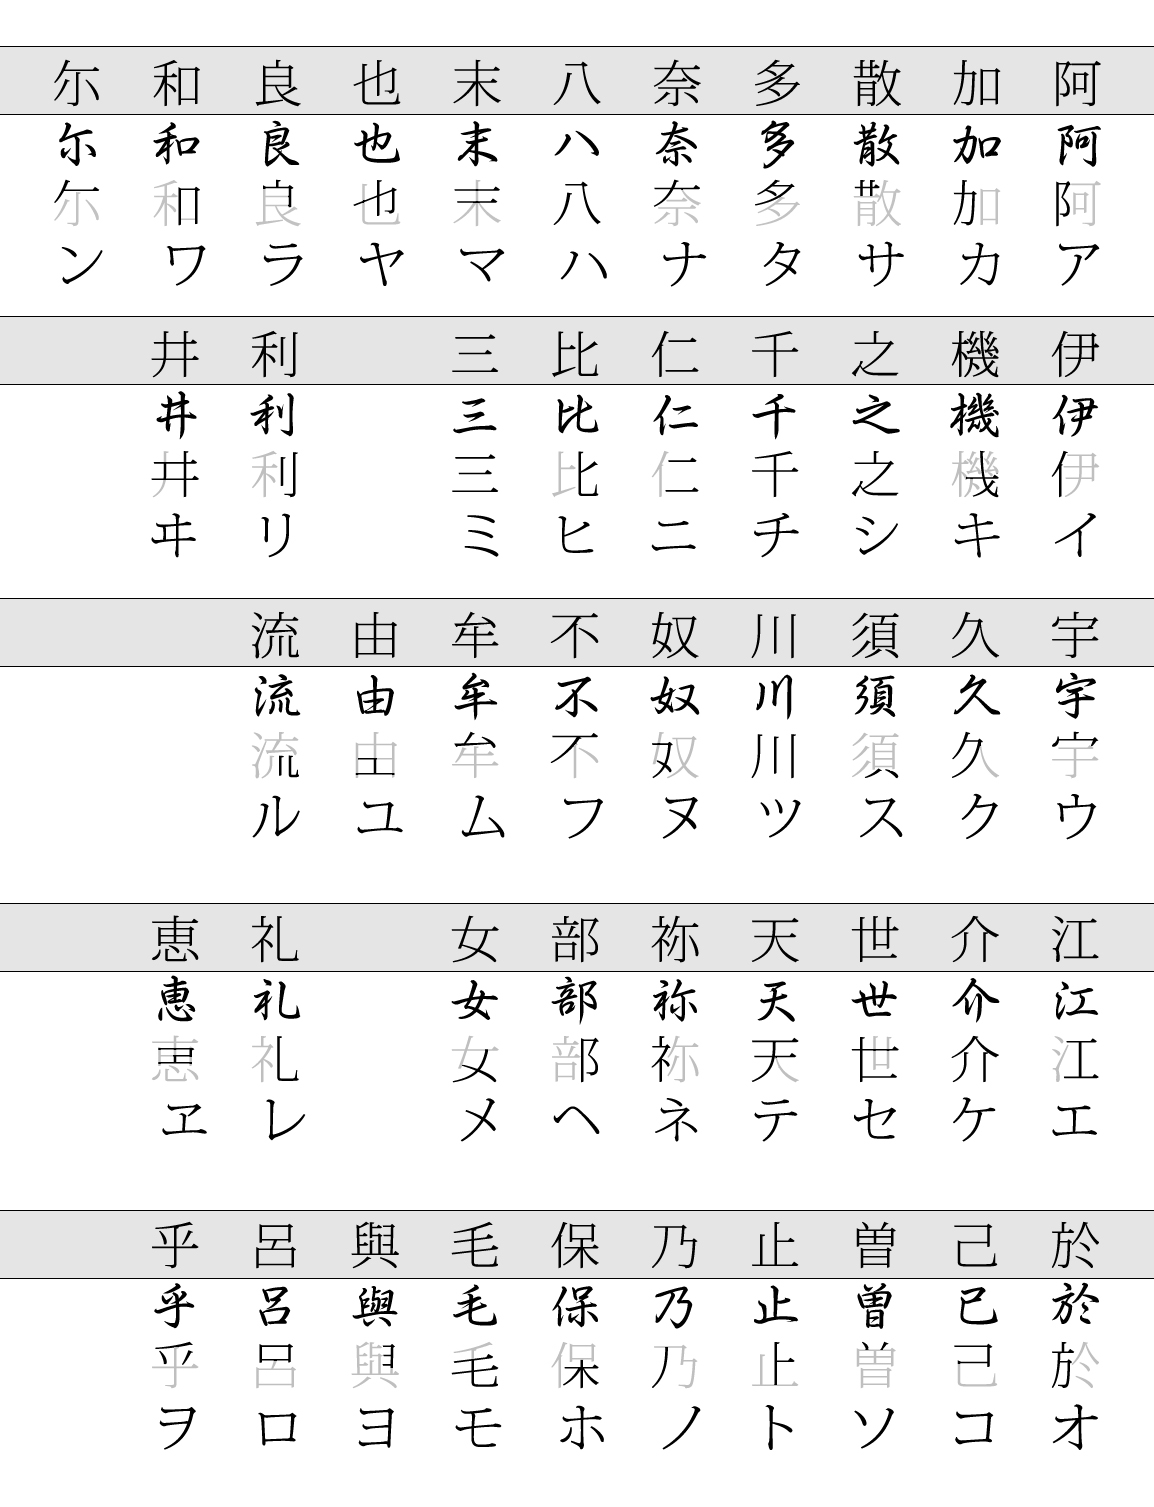 An Introduction To Japanese